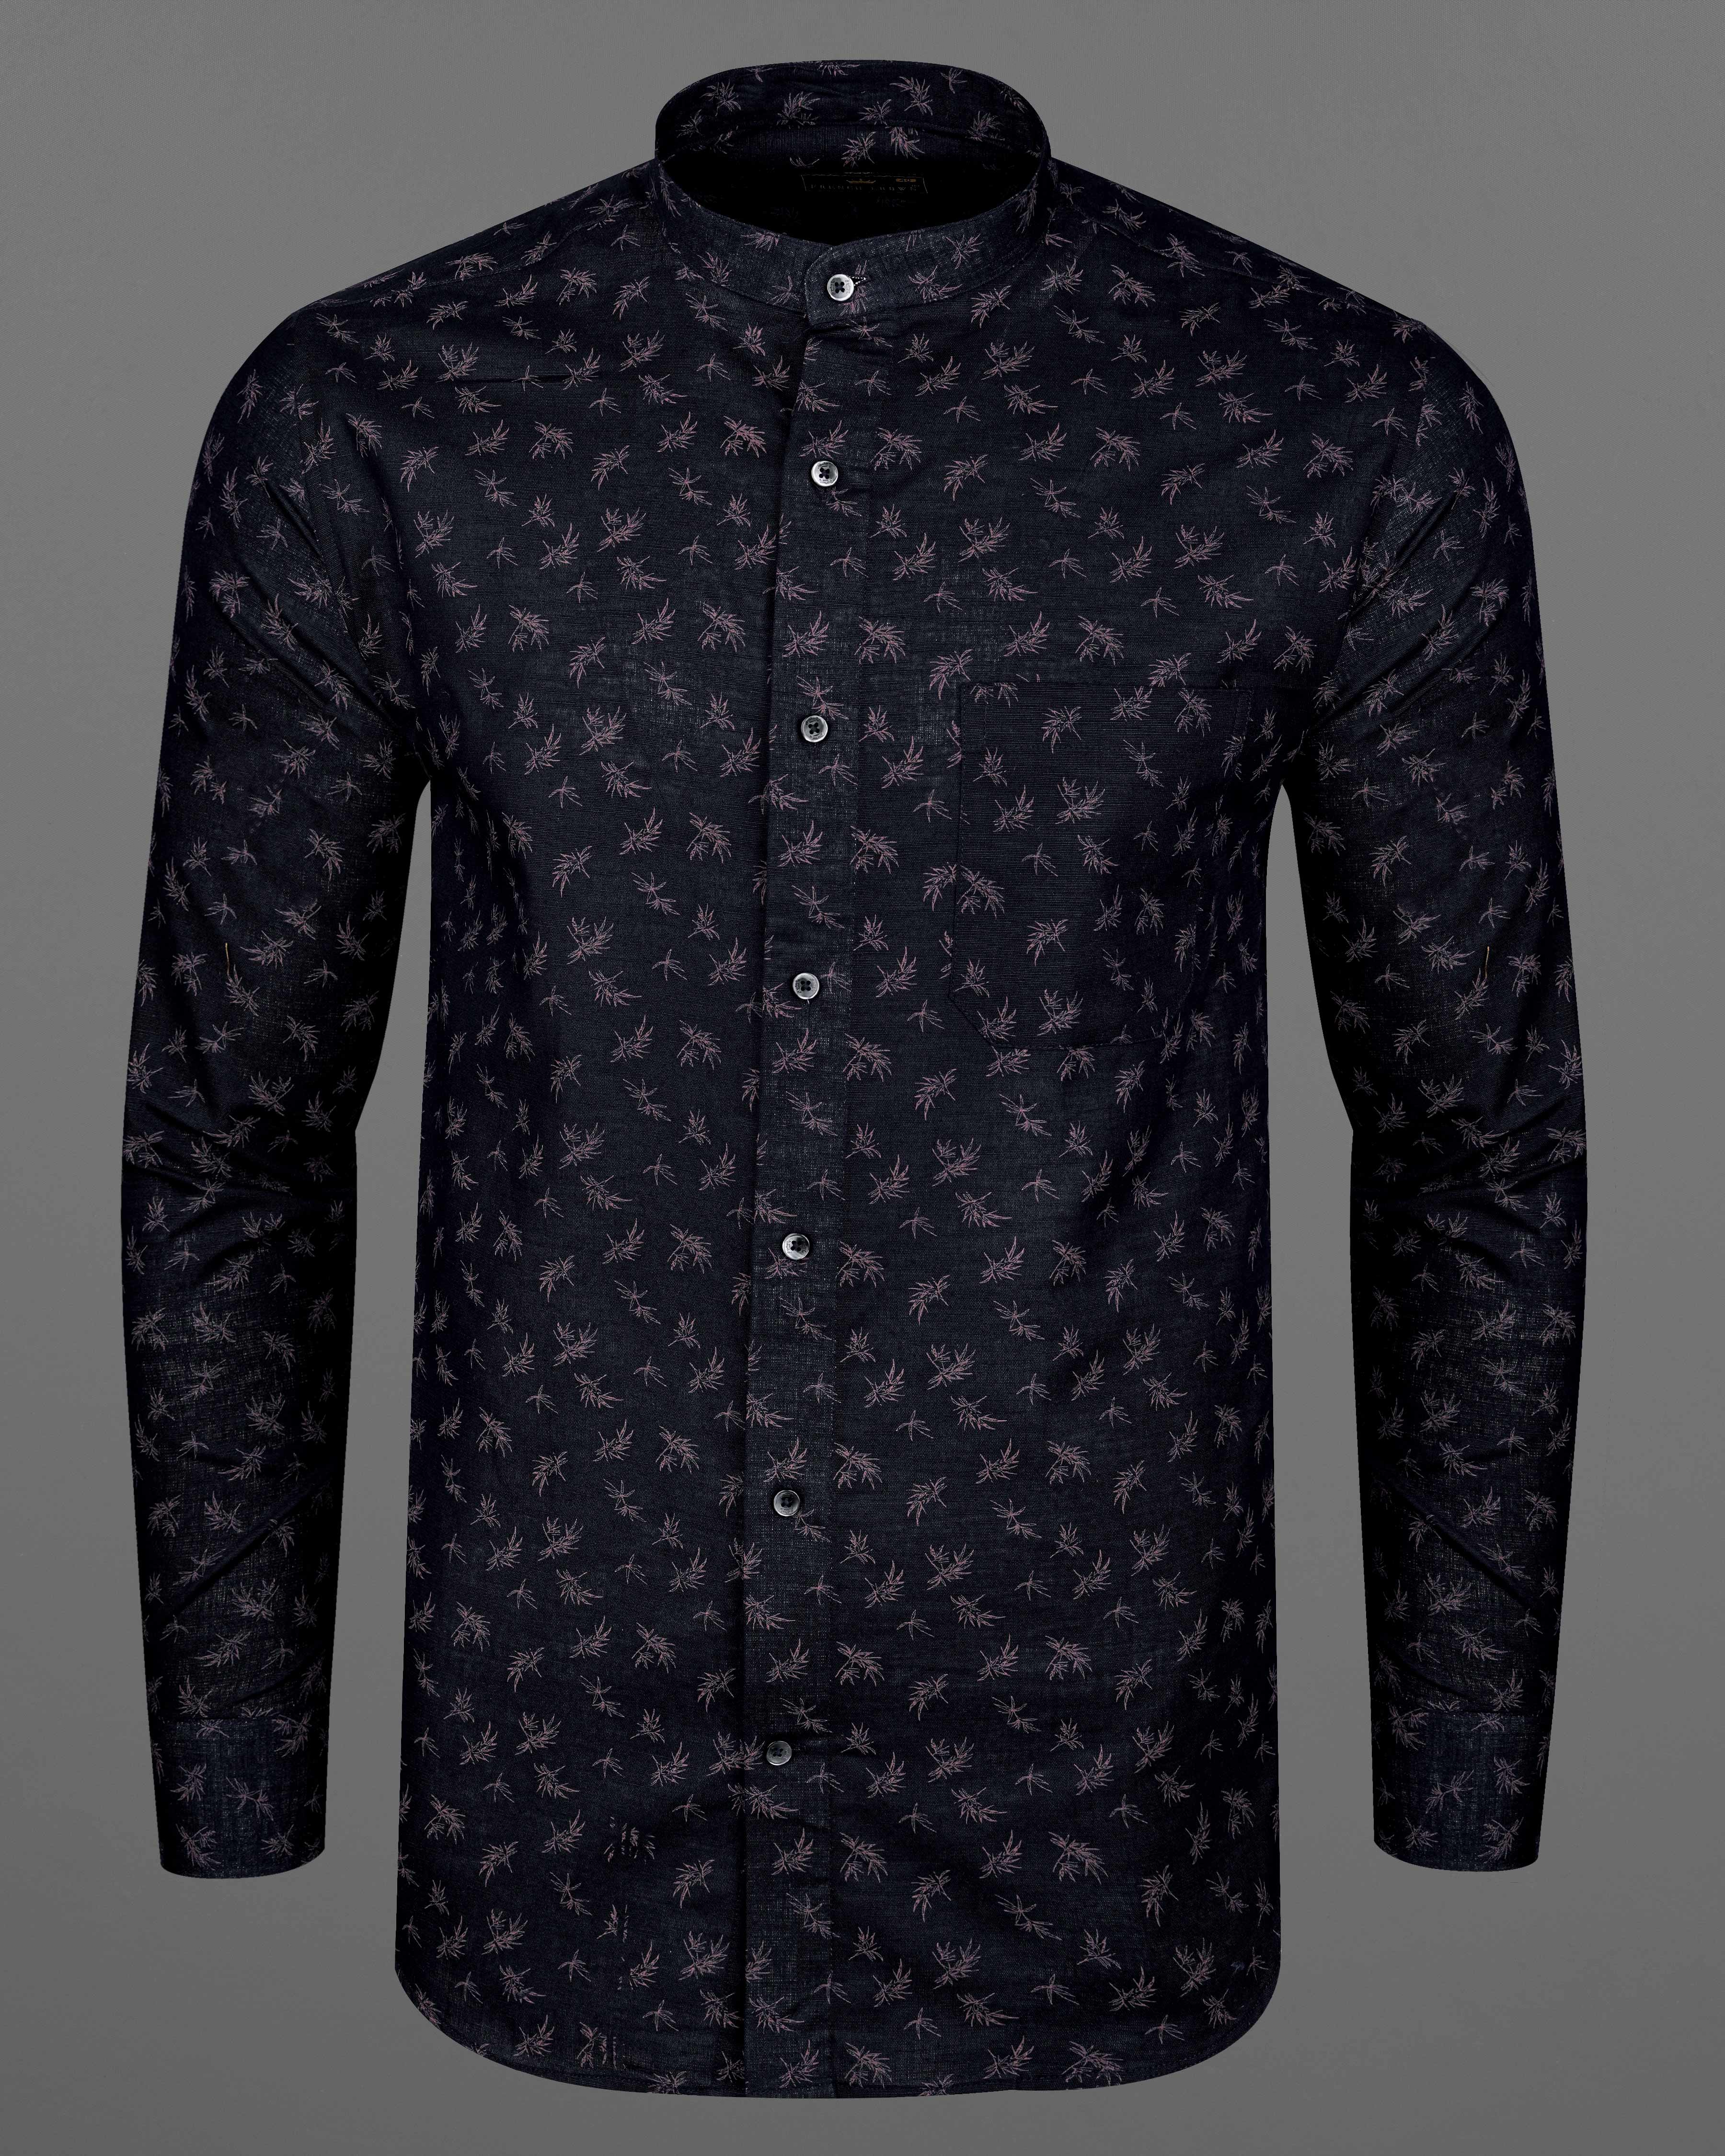 Jade Navy Blue with Falcon Violet Ditsy Luxurious Linen Shirt 8284-M-BLK -38,8284-M-BLK -H-38,8284-M-BLK -39,8284-M-BLK -H-39,8284-M-BLK -40,8284-M-BLK -H-40,8284-M-BLK -42,8284-M-BLK -H-42,8284-M-BLK -44,8284-M-BLK -H-44,8284-M-BLK -46,8284-M-BLK -H-46,8284-M-BLK -48,8284-M-BLK -H-48,8284-M-BLK -50,8284-M-BLK -H-50,8284-M-BLK -52,8284-M-BLK -H-52